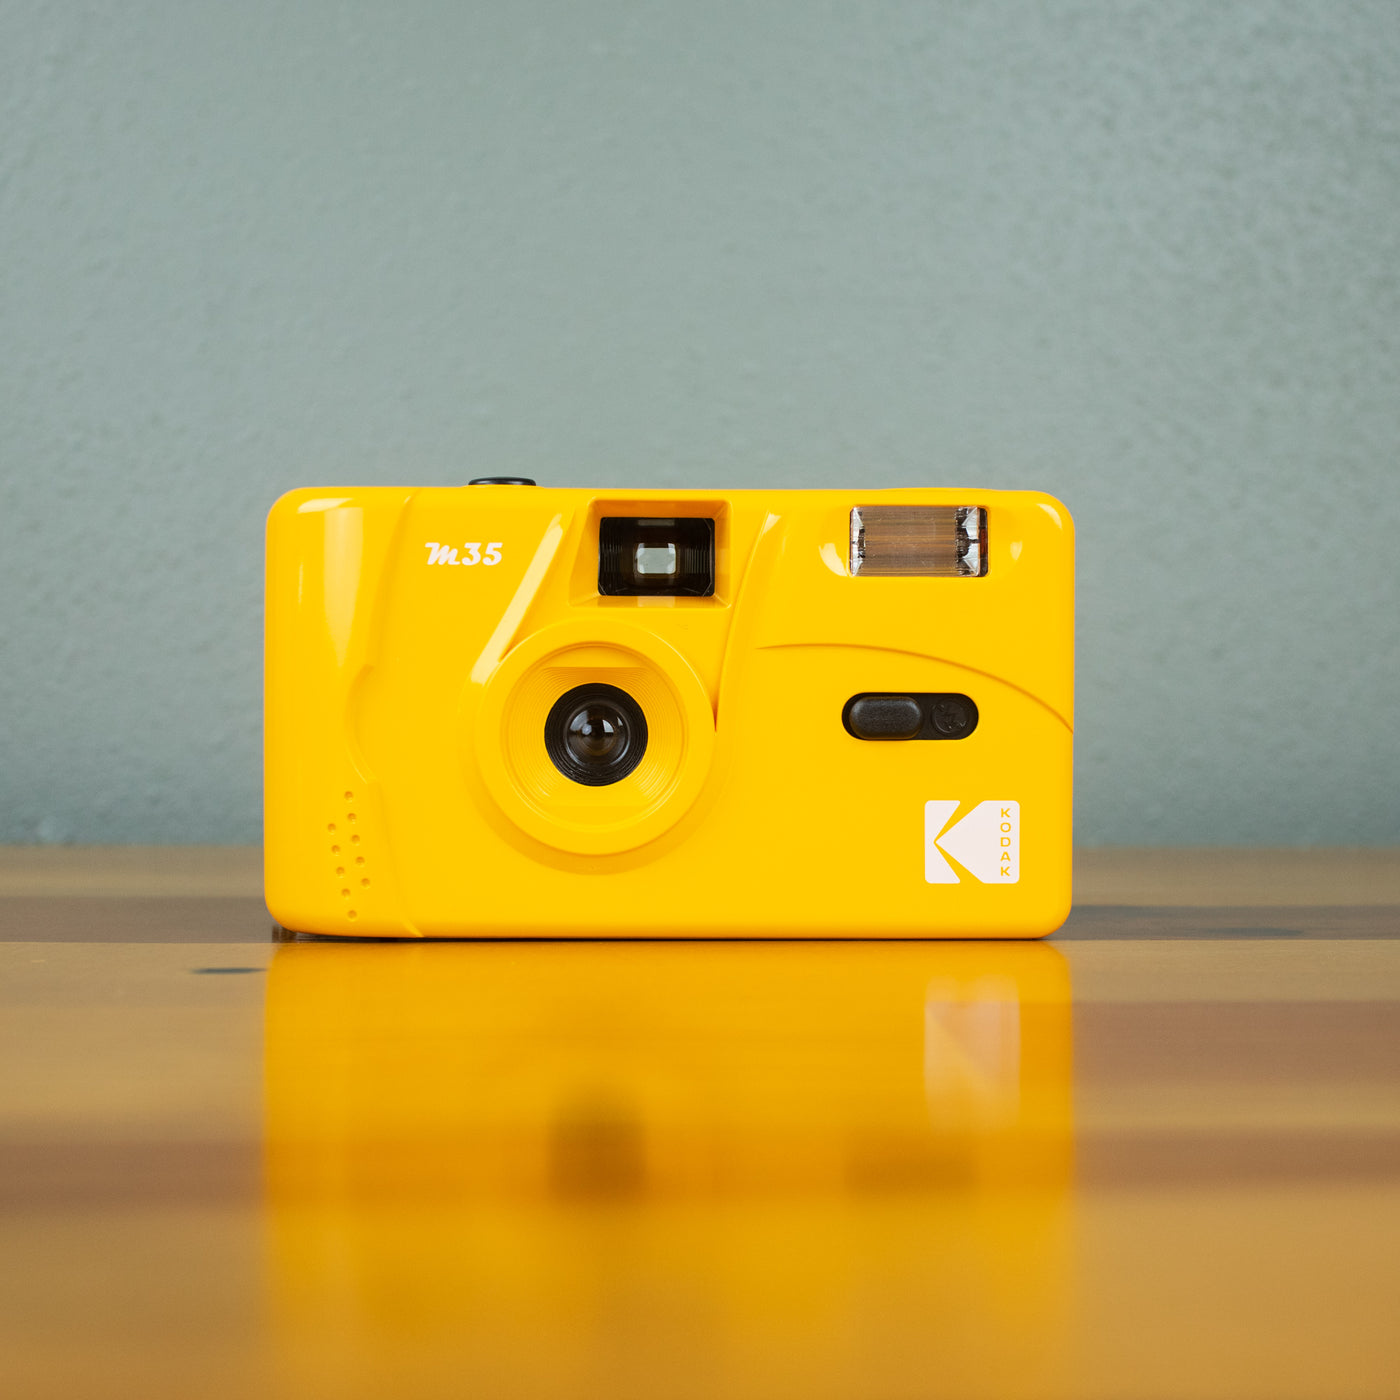 A front view of a yellow-colored Kodak M35 Film Camera.